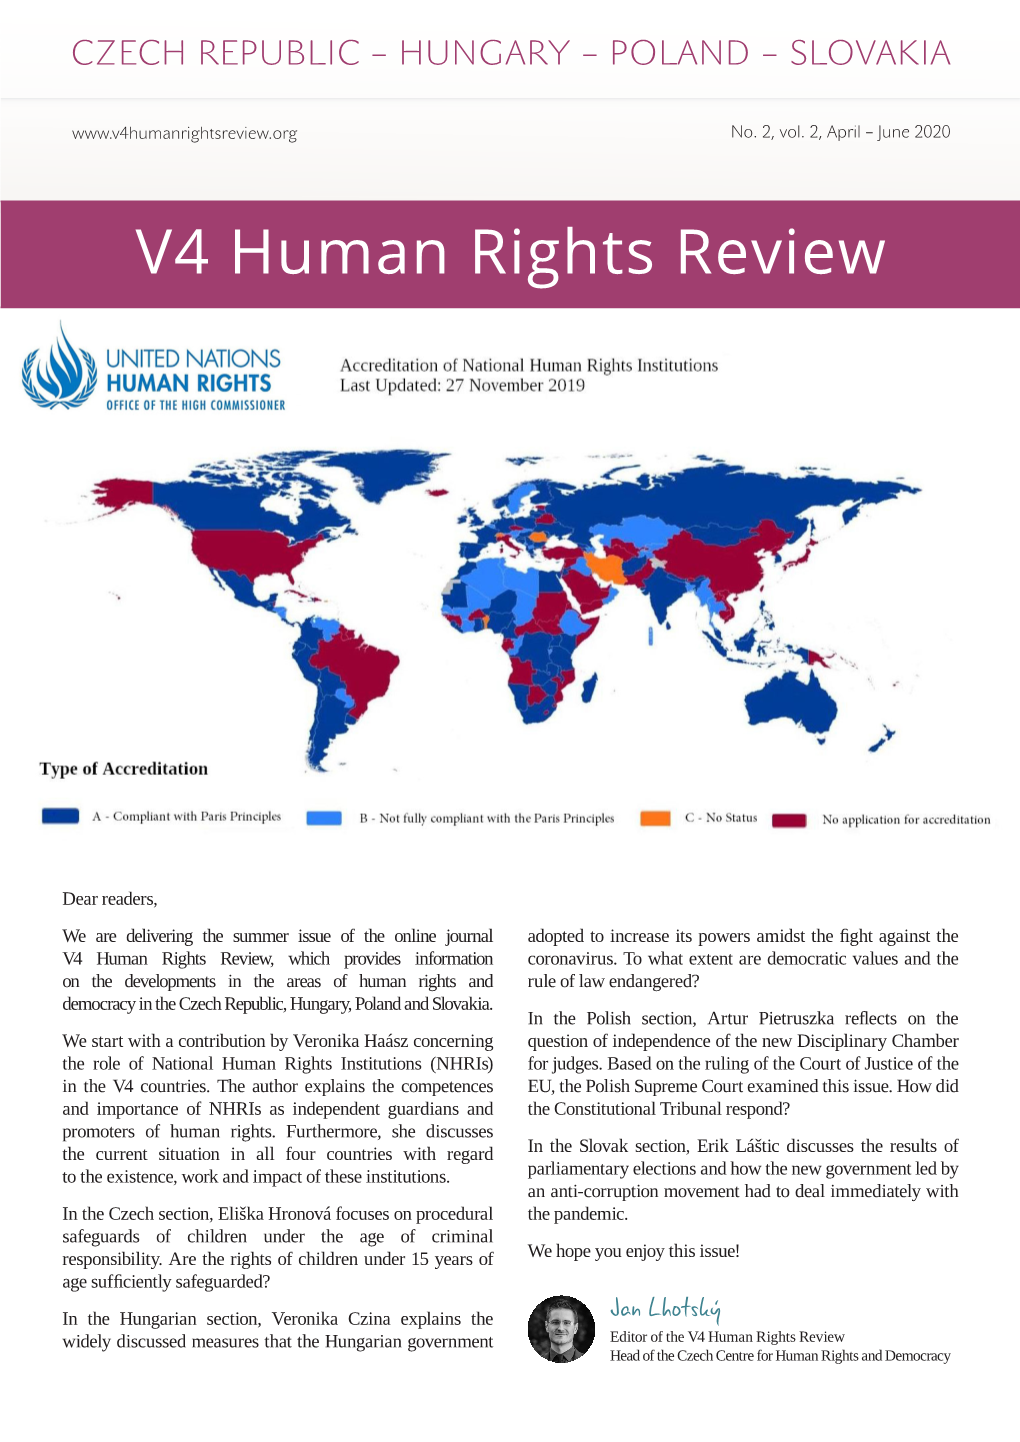 V4 Human Rights Review